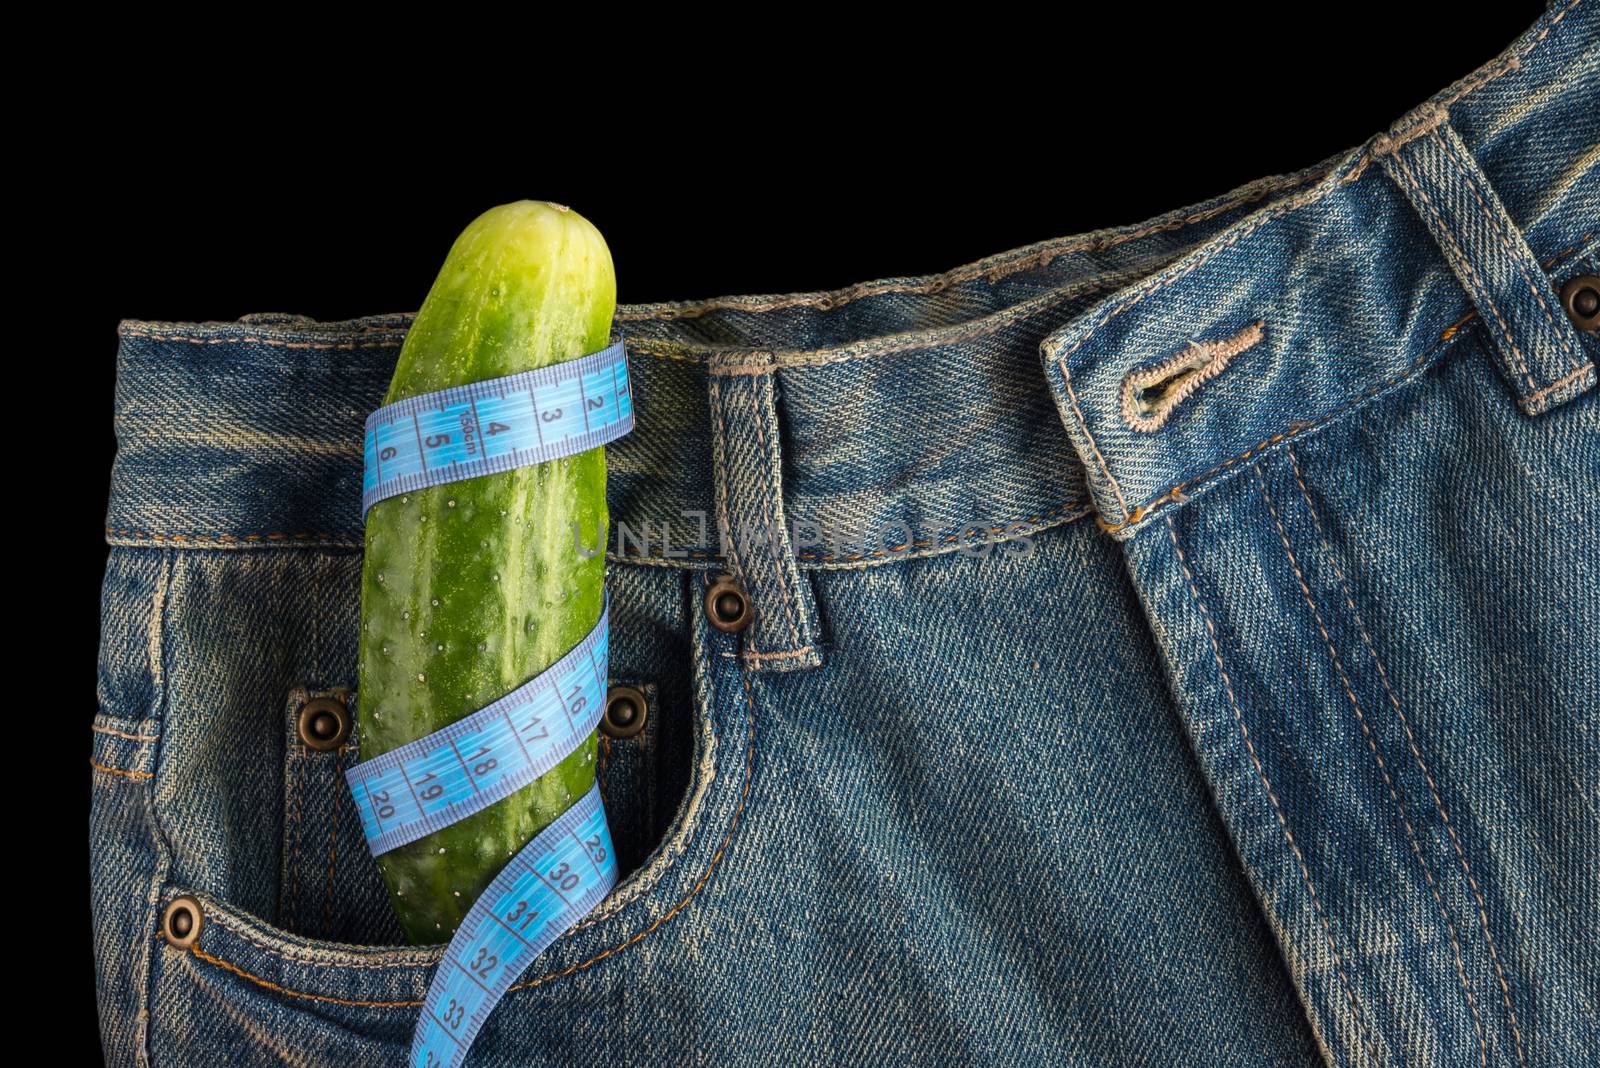 Big cucumber like the penis, men's jeans  and centimeter, on dark background, potency concept